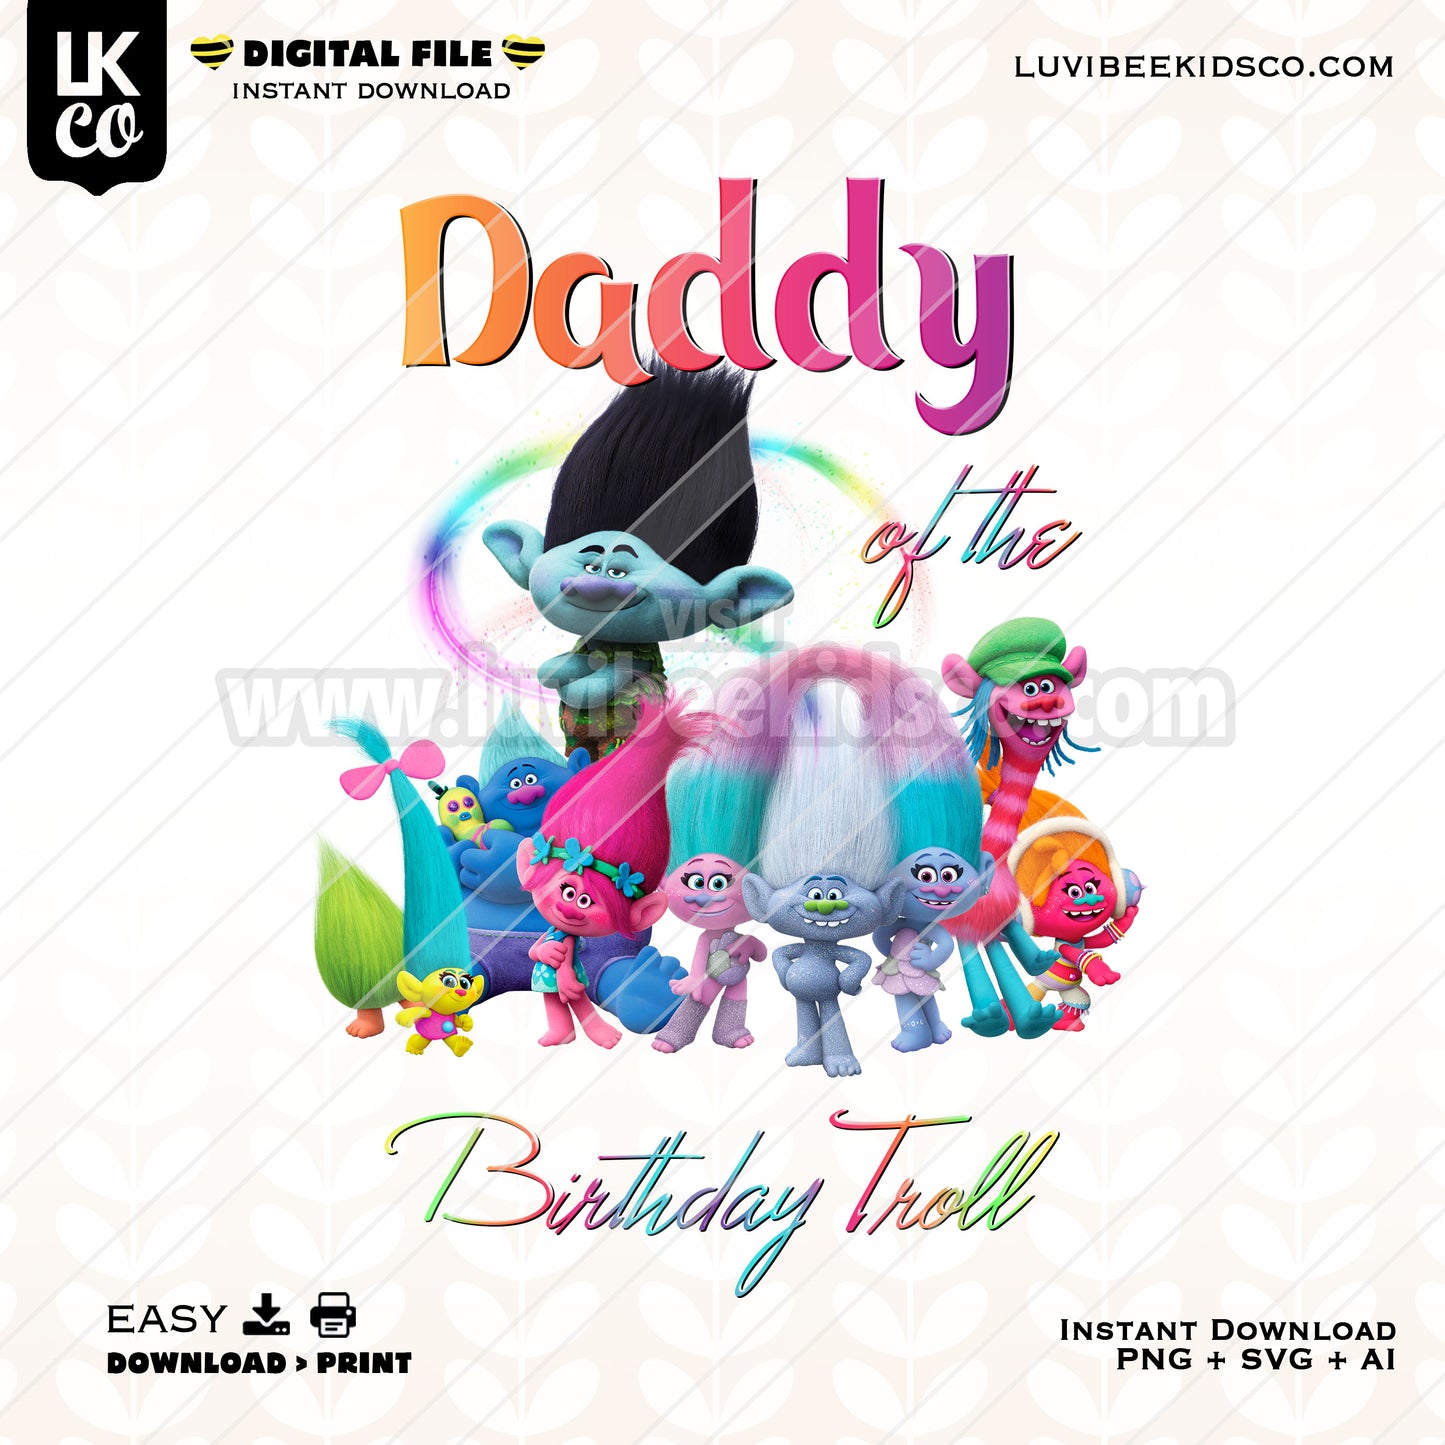 Trolls Inspired Logo for Birthdays, Events, Crafts, and T-Shirts - Rainbow Daddy of the Birthday Troll - Instant Download